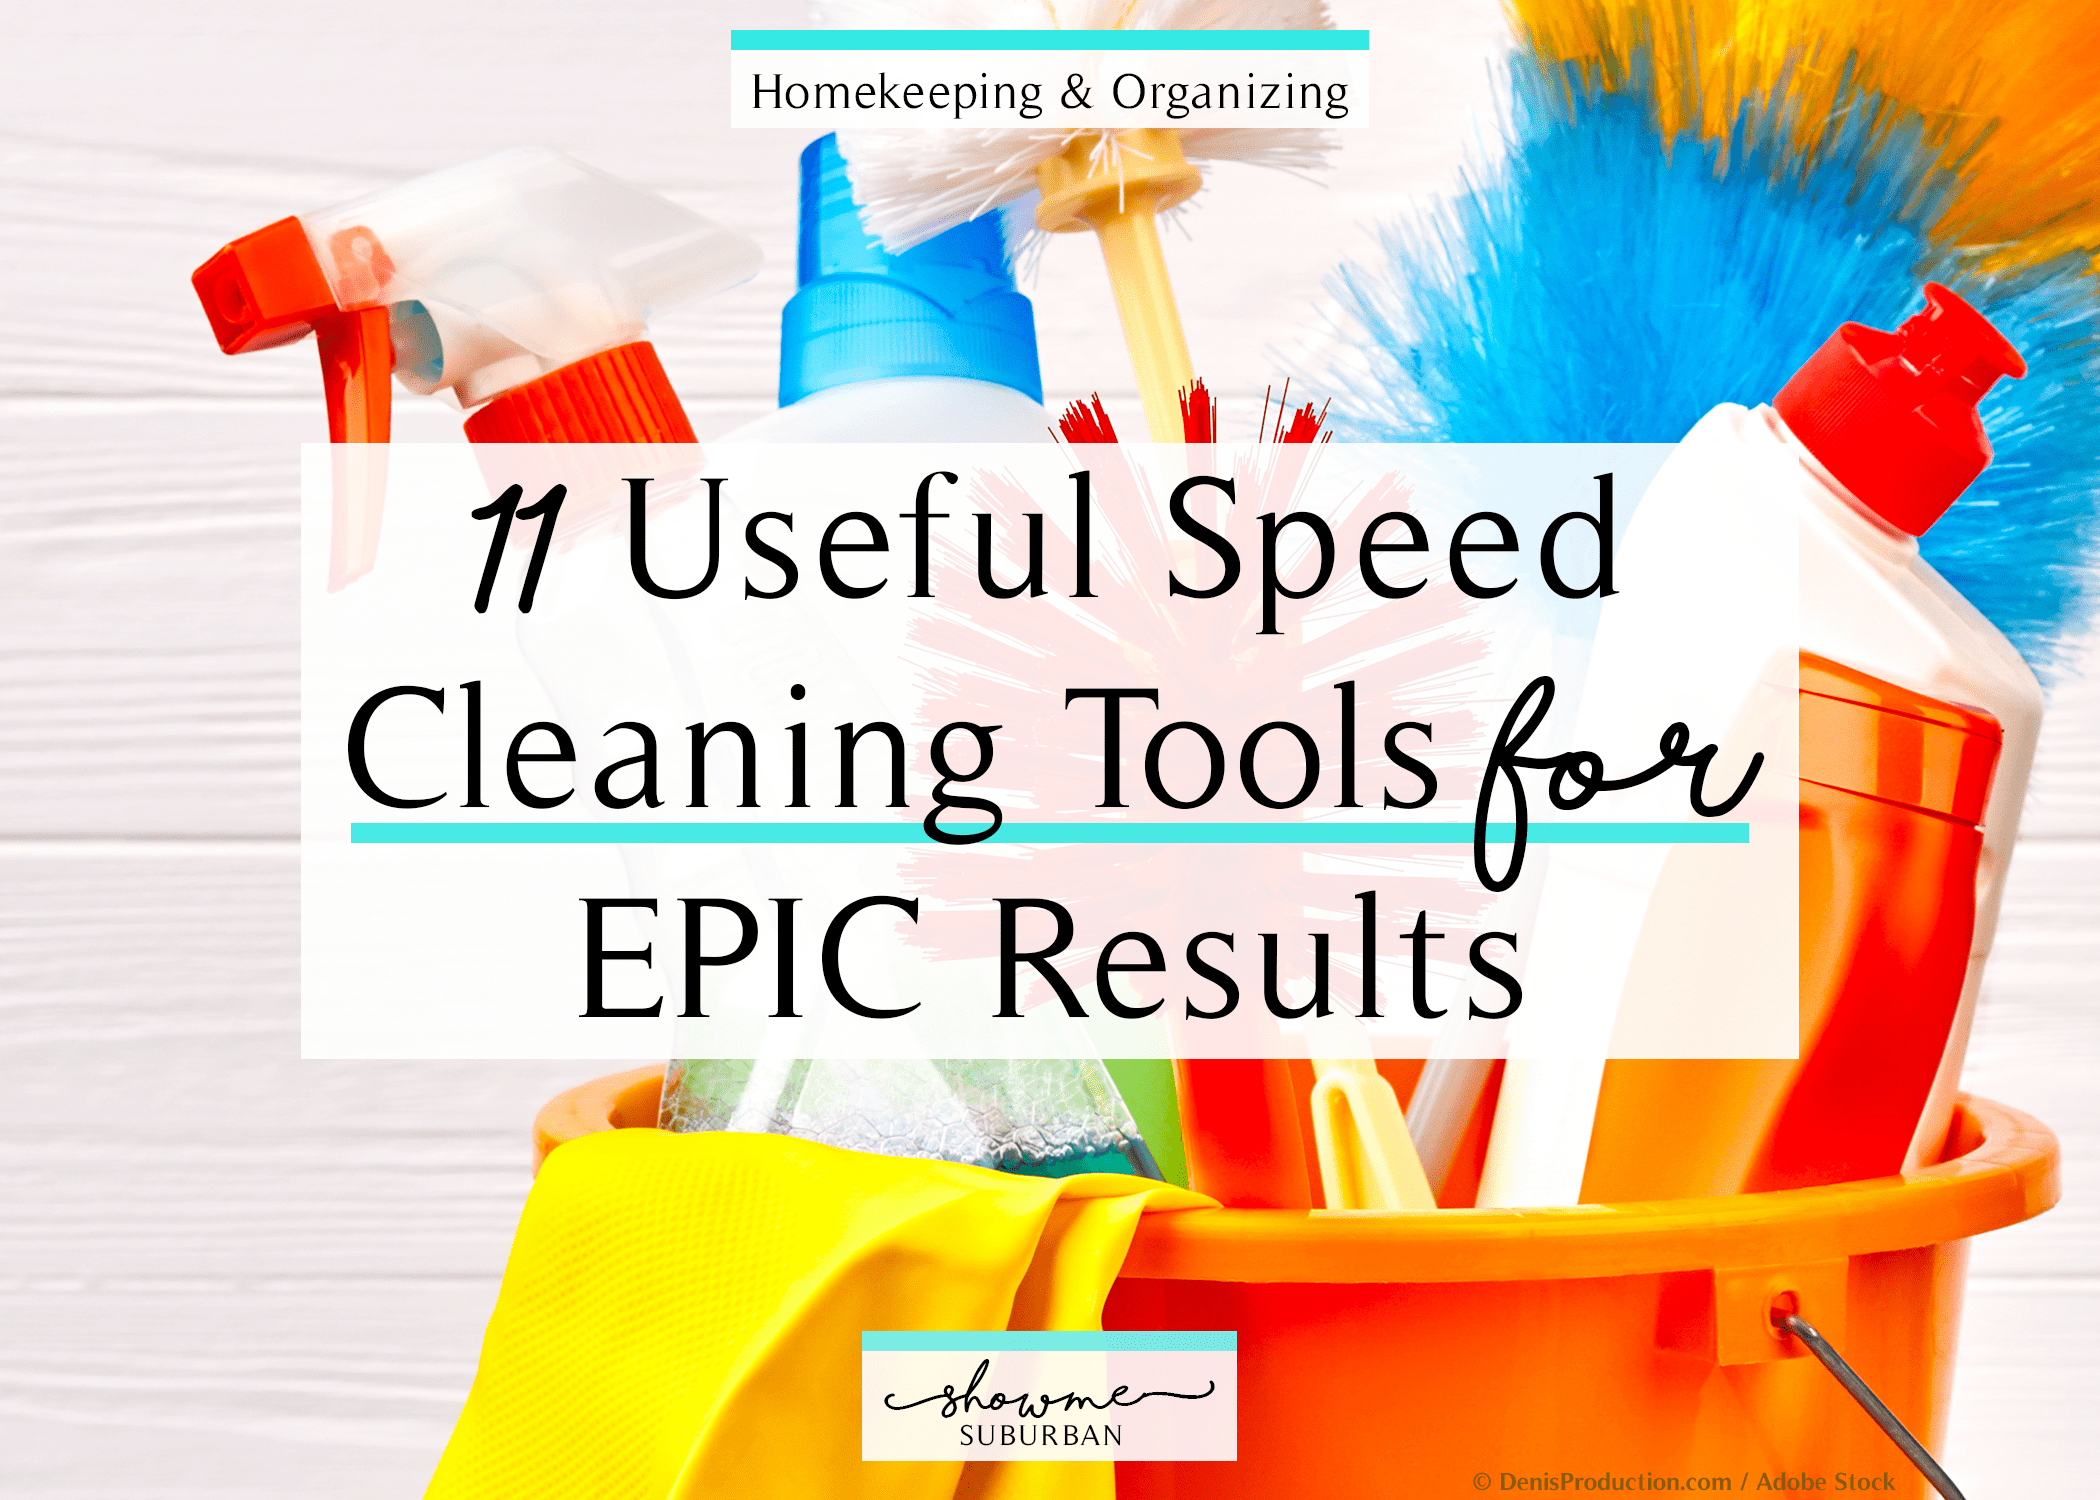 11 Helpful Speed Cleaning Tools to Save Time and Energy - ShowMe